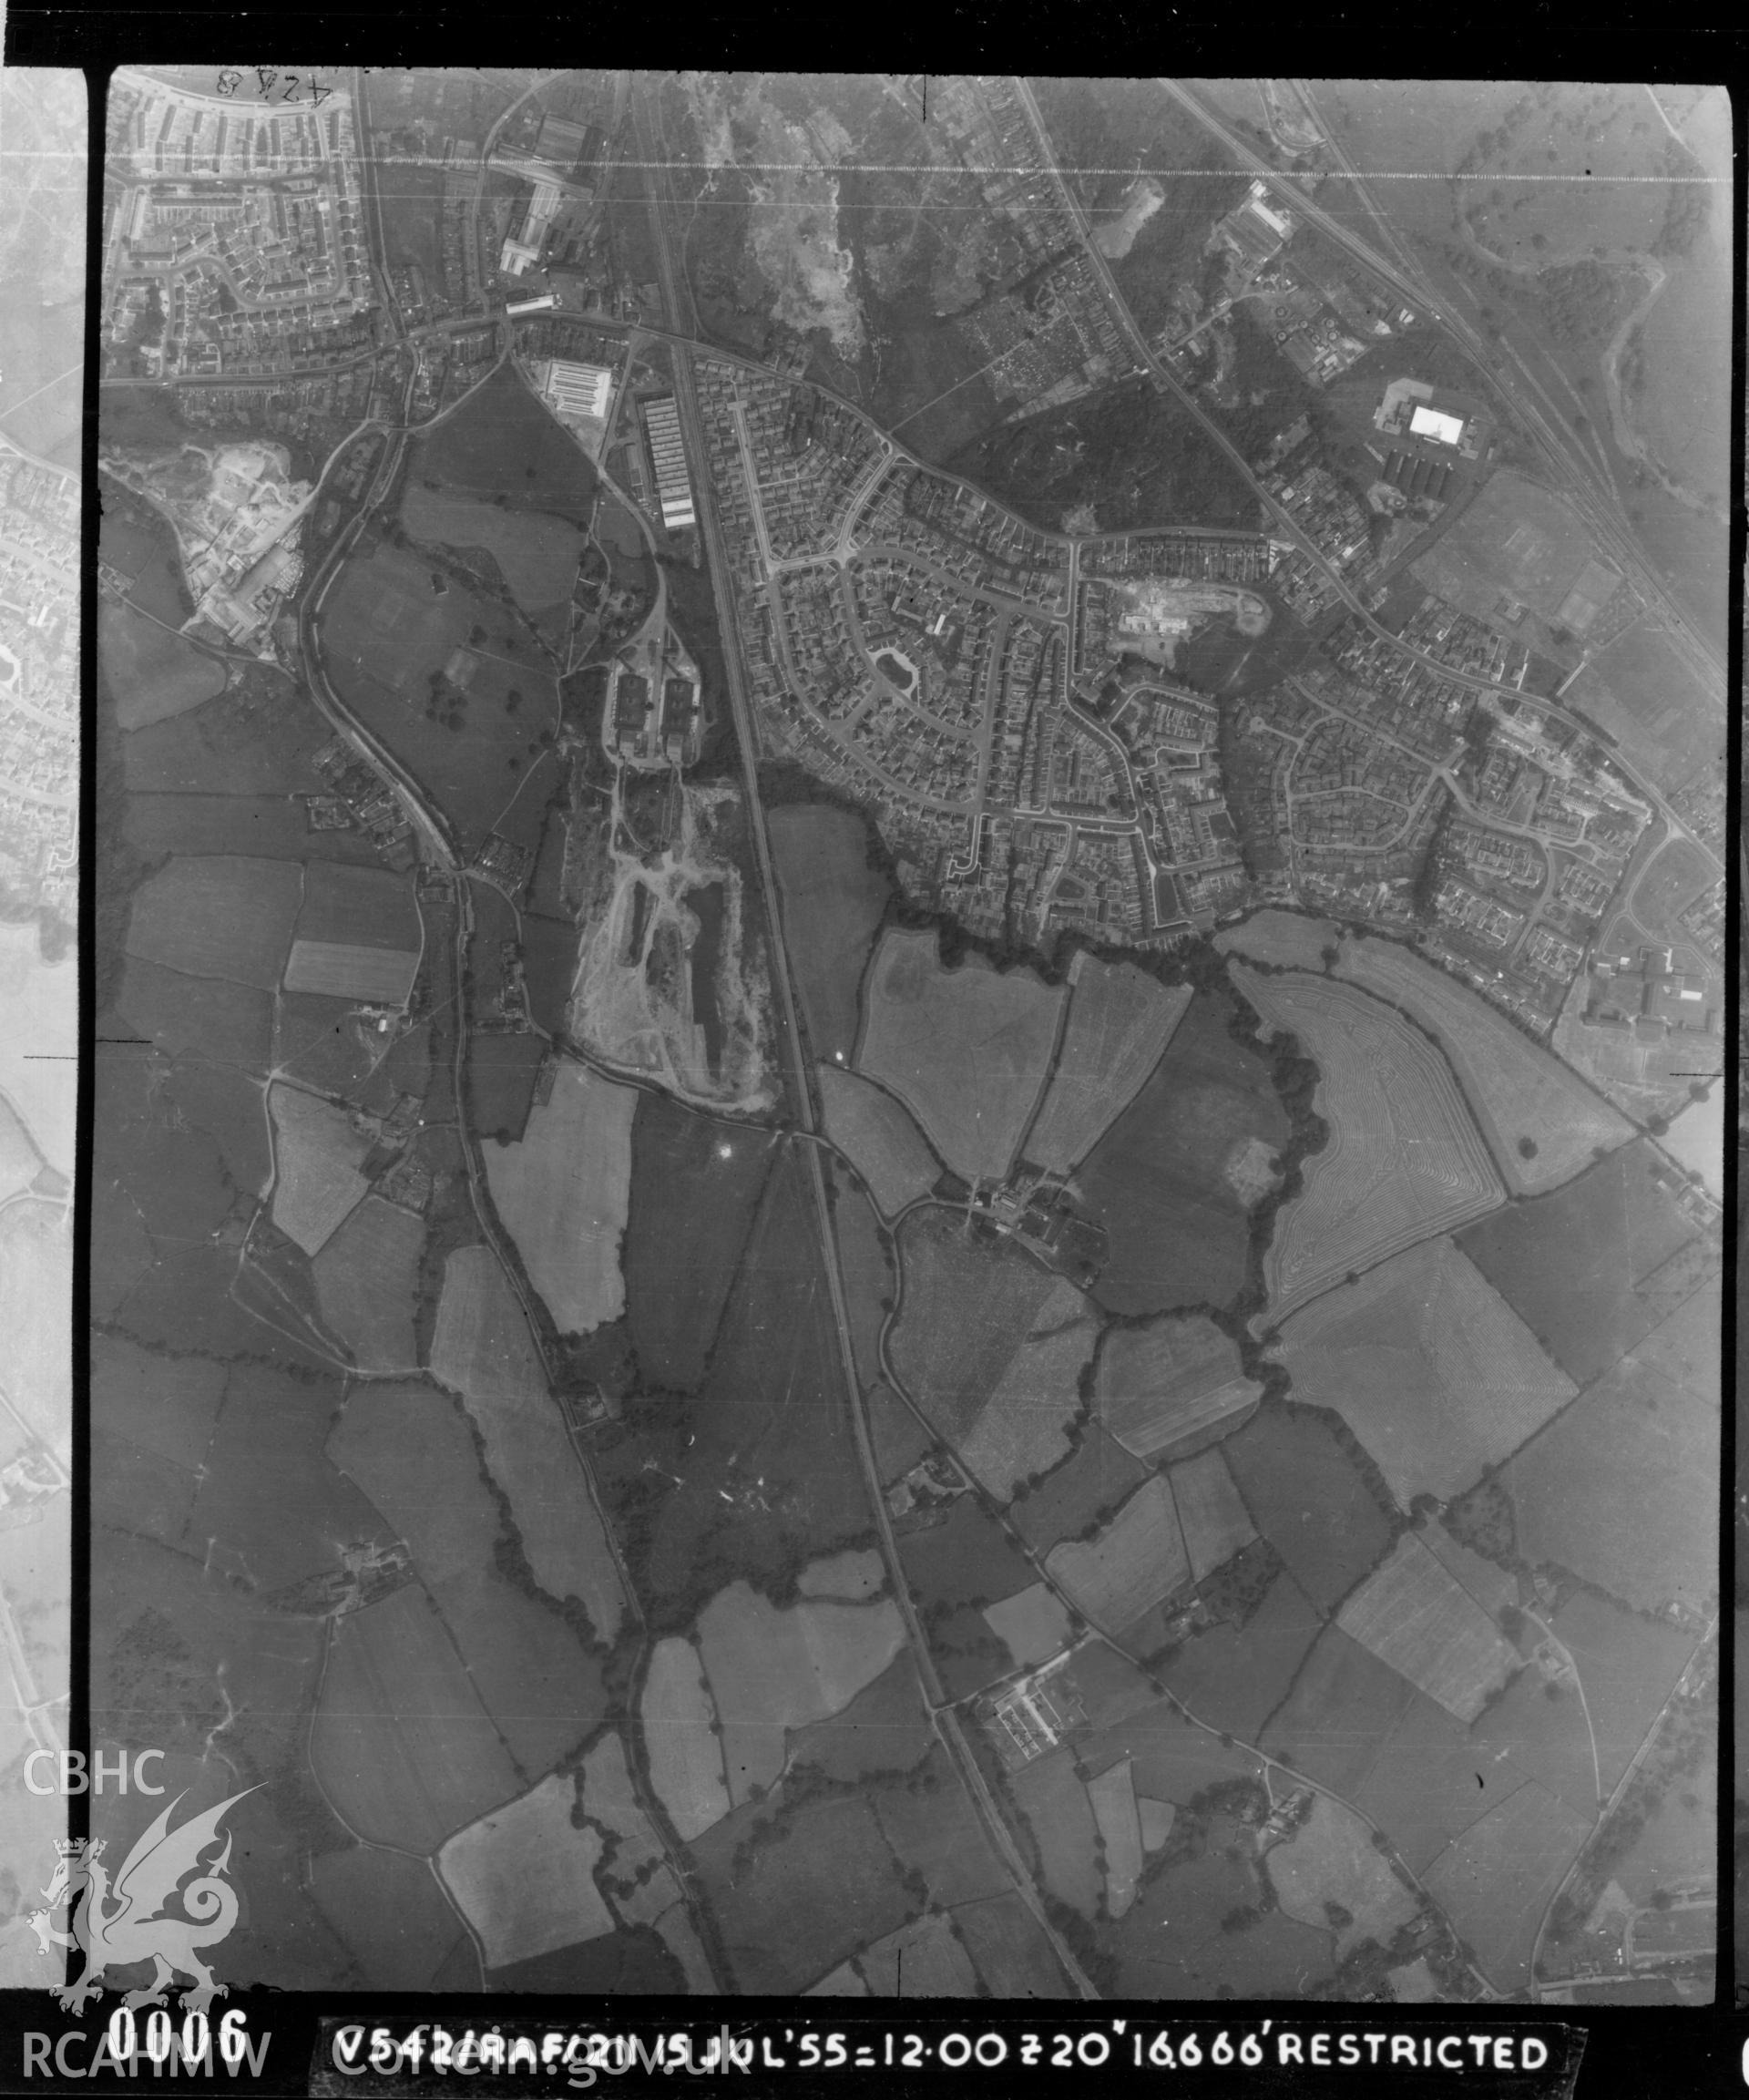 Aerial photograph of Cwmbran, taken on 15th July 1955. Included as part of Archaeology Wales' desk based assessment of former Llantarnam Community Primary School, Croeswen, Oakfield, Cwmbran, conducted in 2017.